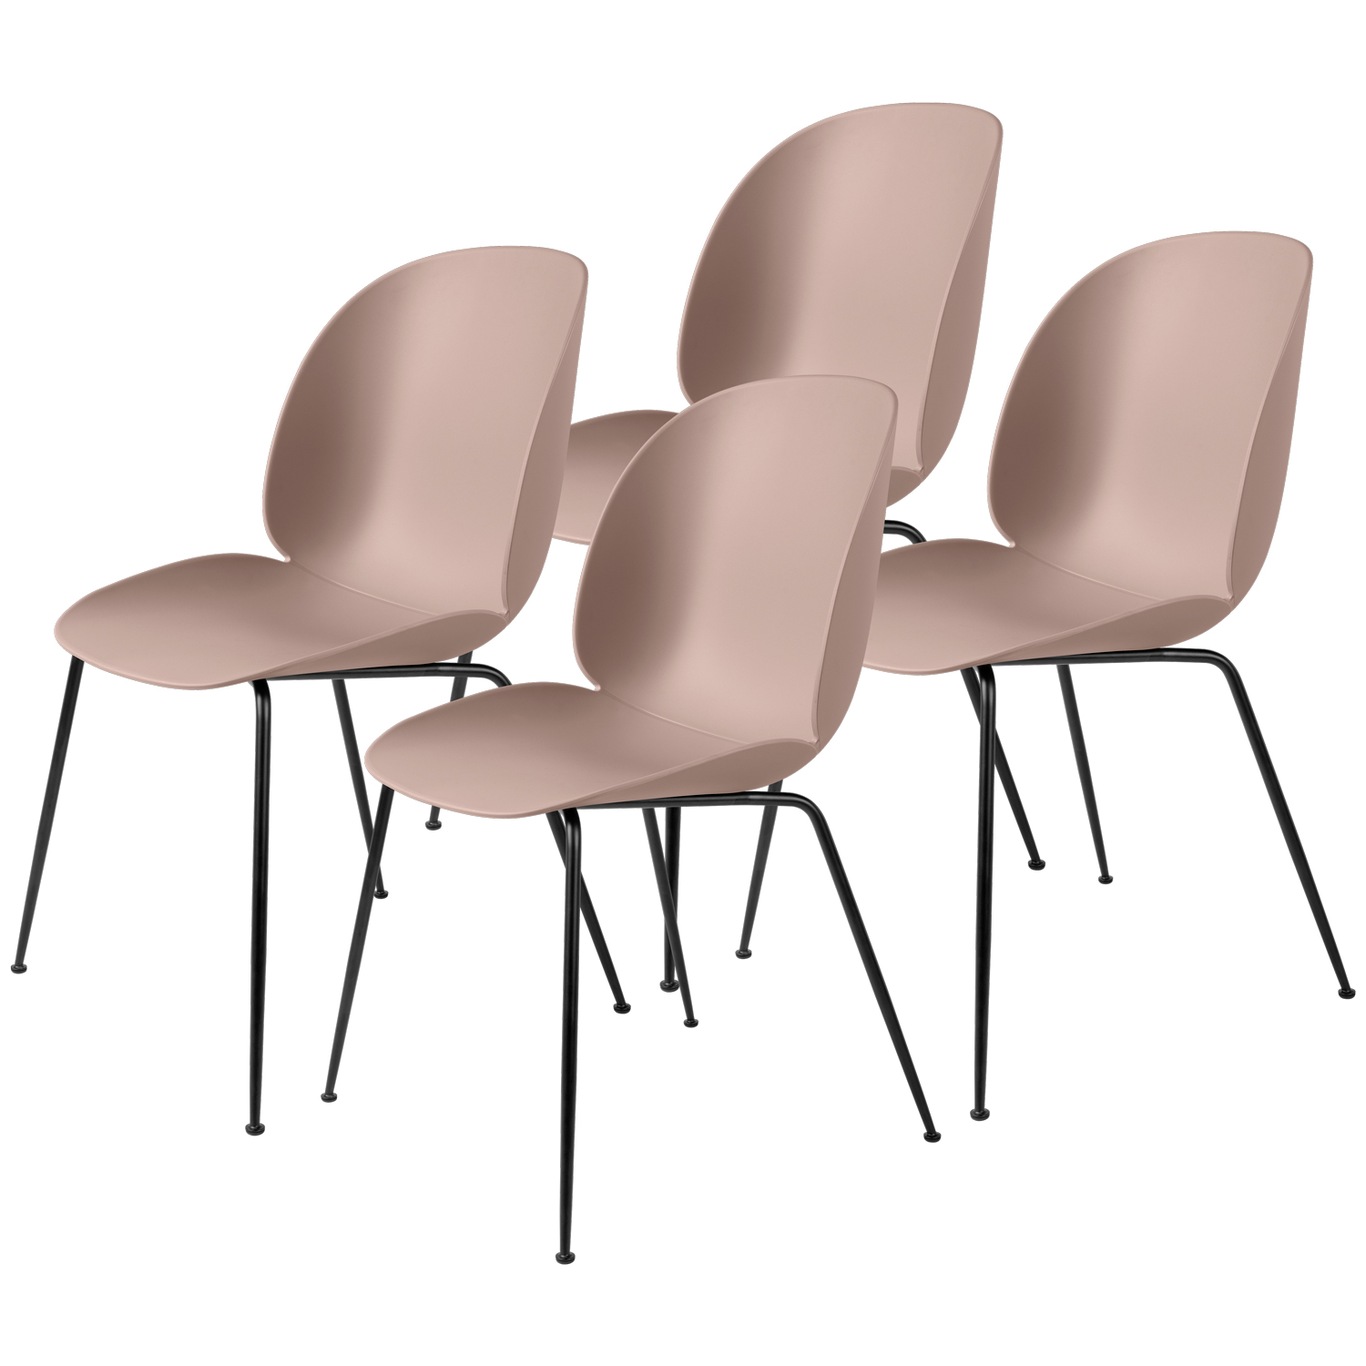 Beetle Dining Chair Unupholstered, Conic Base Black, Set Of 4, Sweet Pink